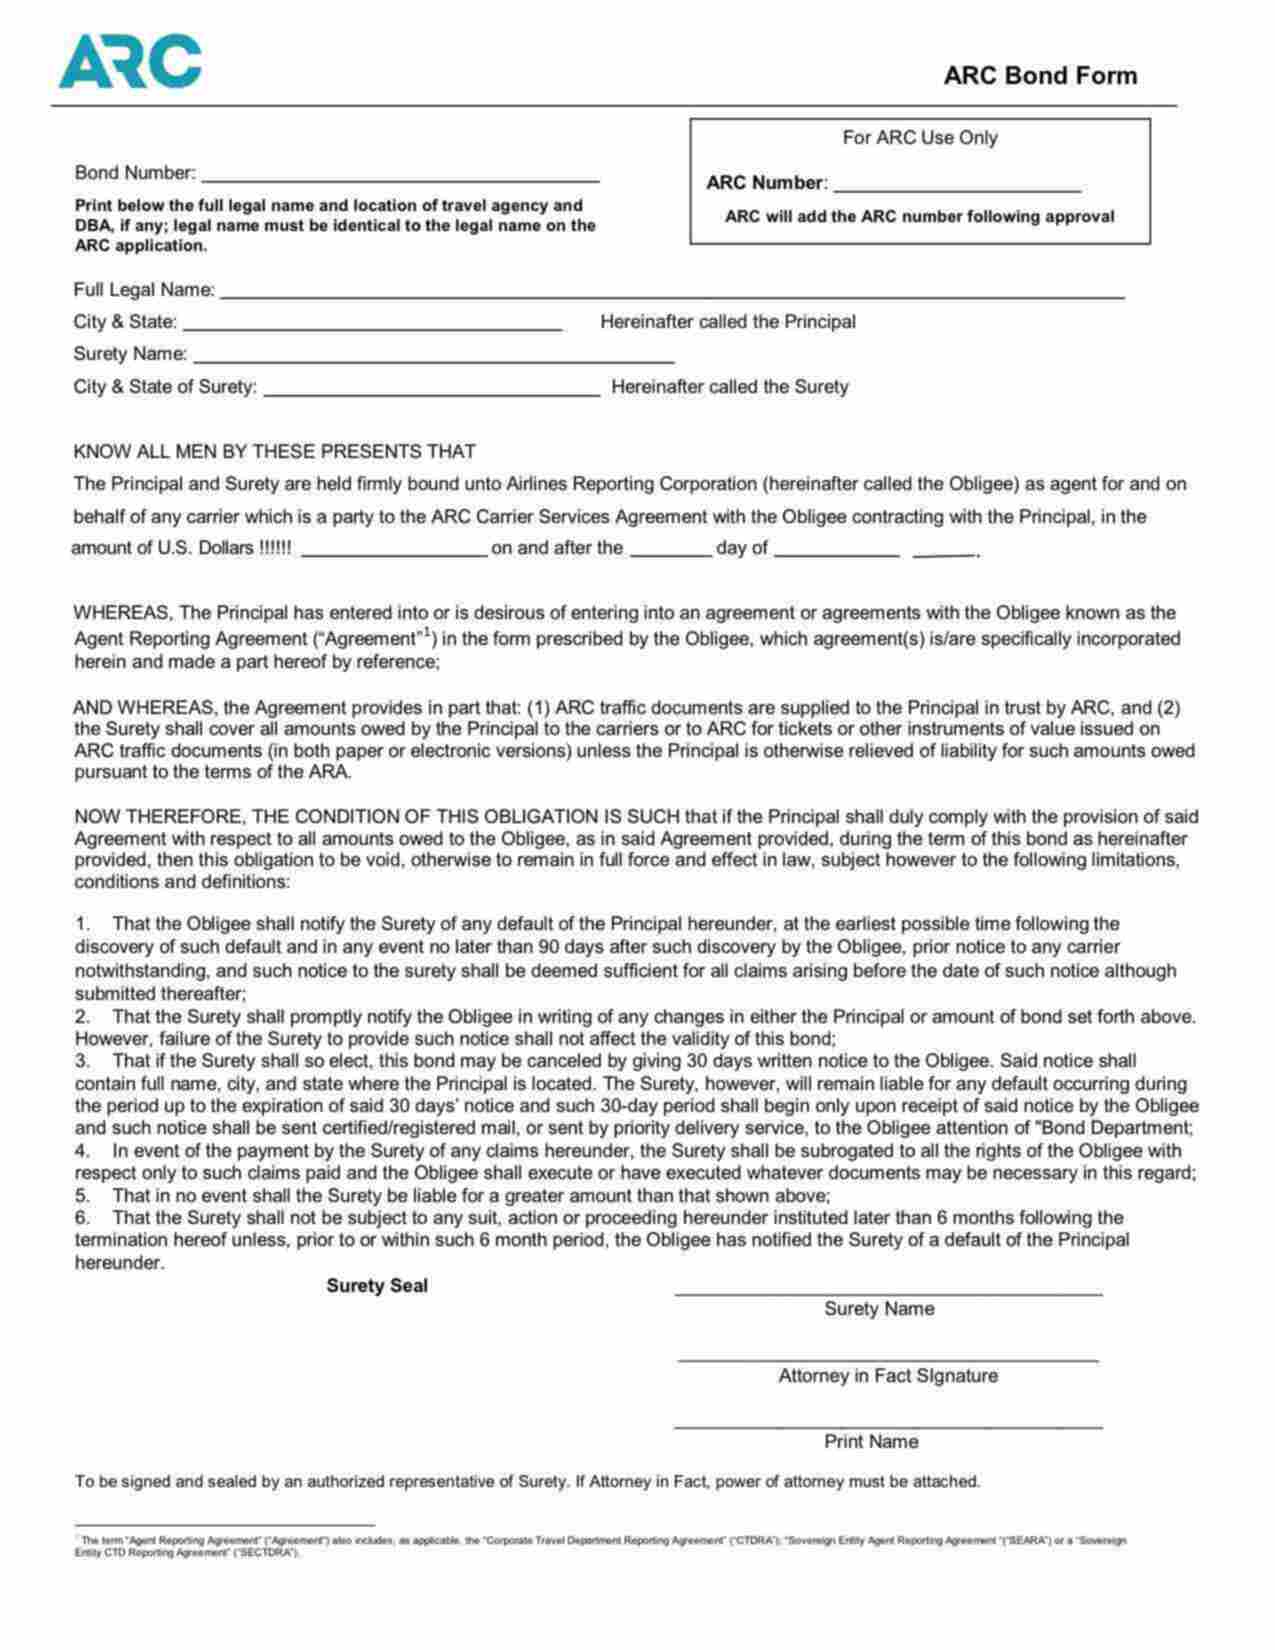 Federal Travel Agency Reporting (ARC) Bond Form